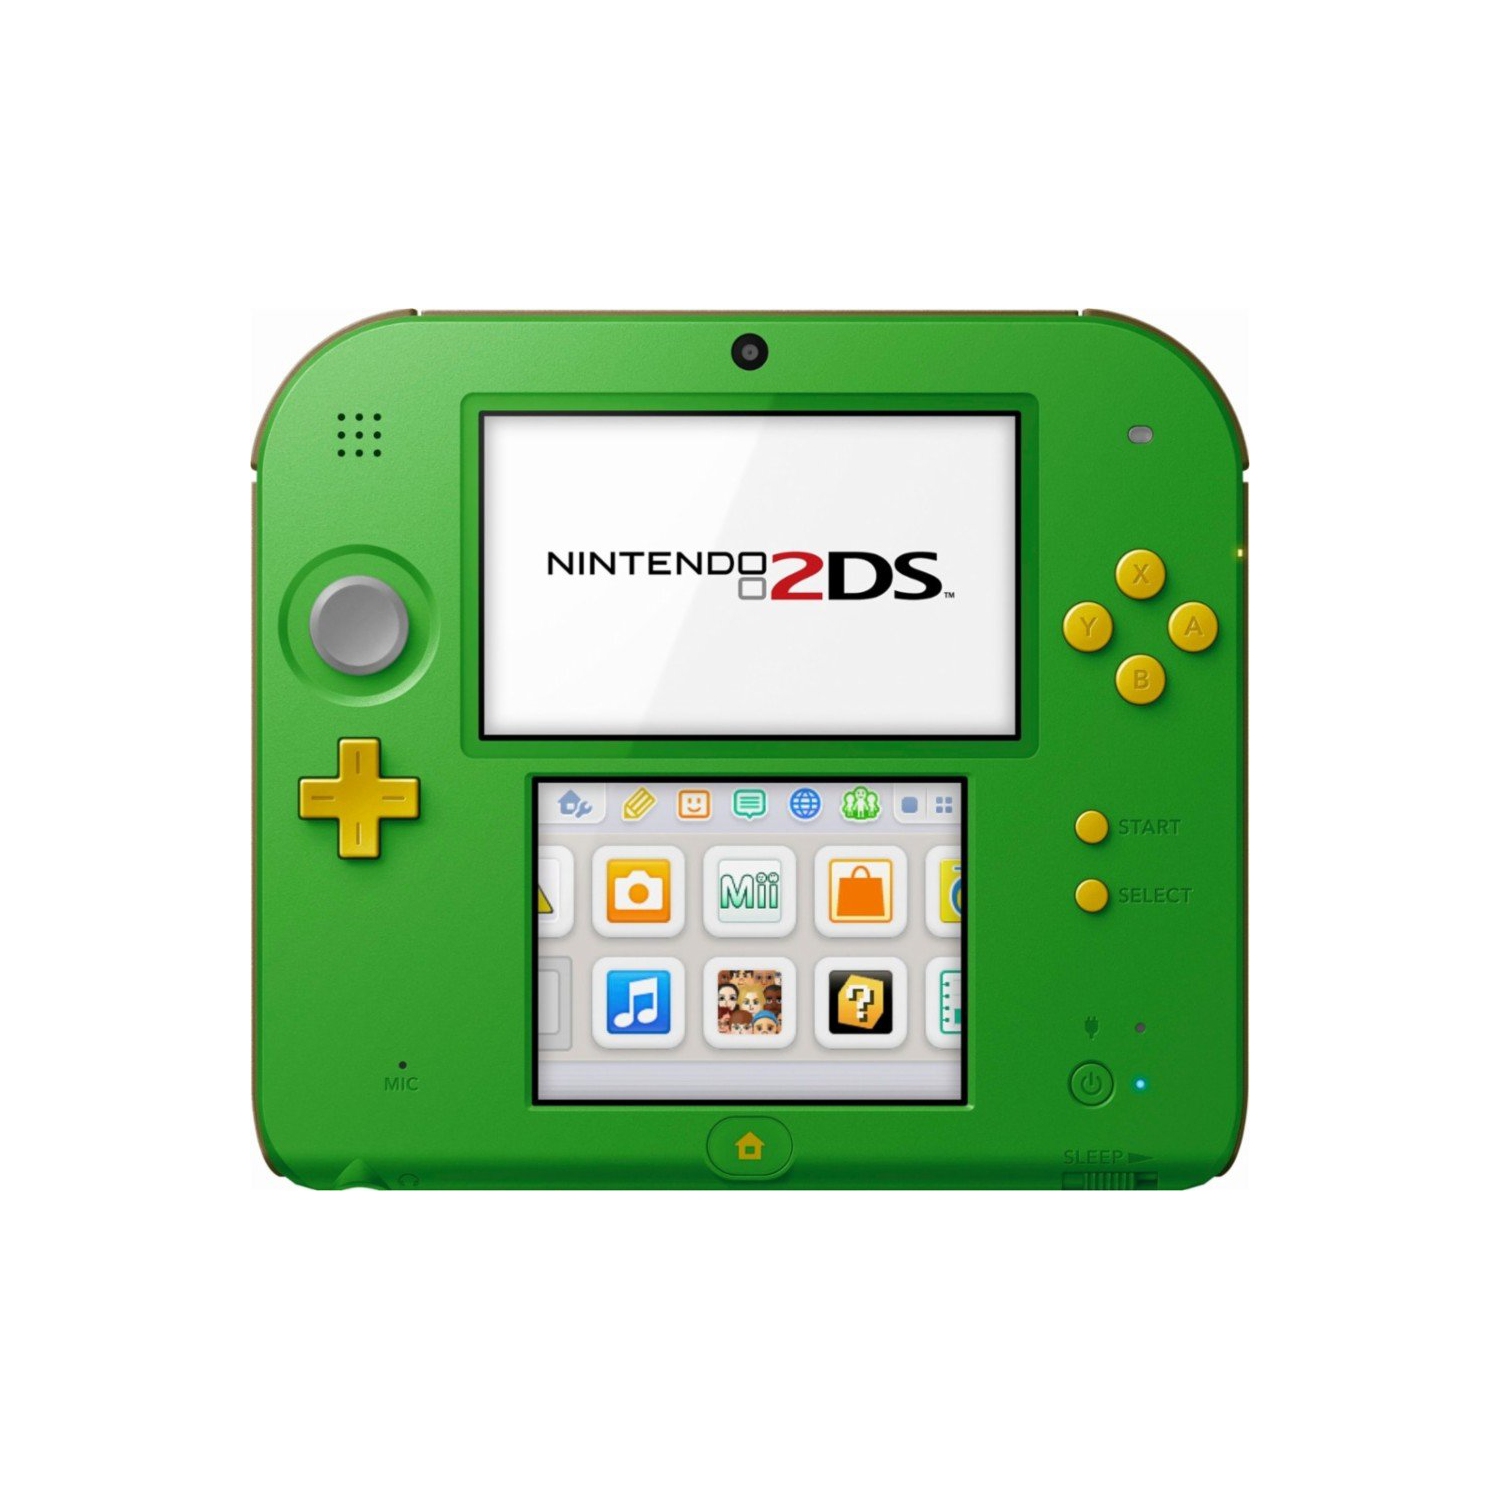 Nintendo 2DS Console - Kokiri Green Link Edition - Includes The Legend of  Zelda: Ocarina of Time 3D